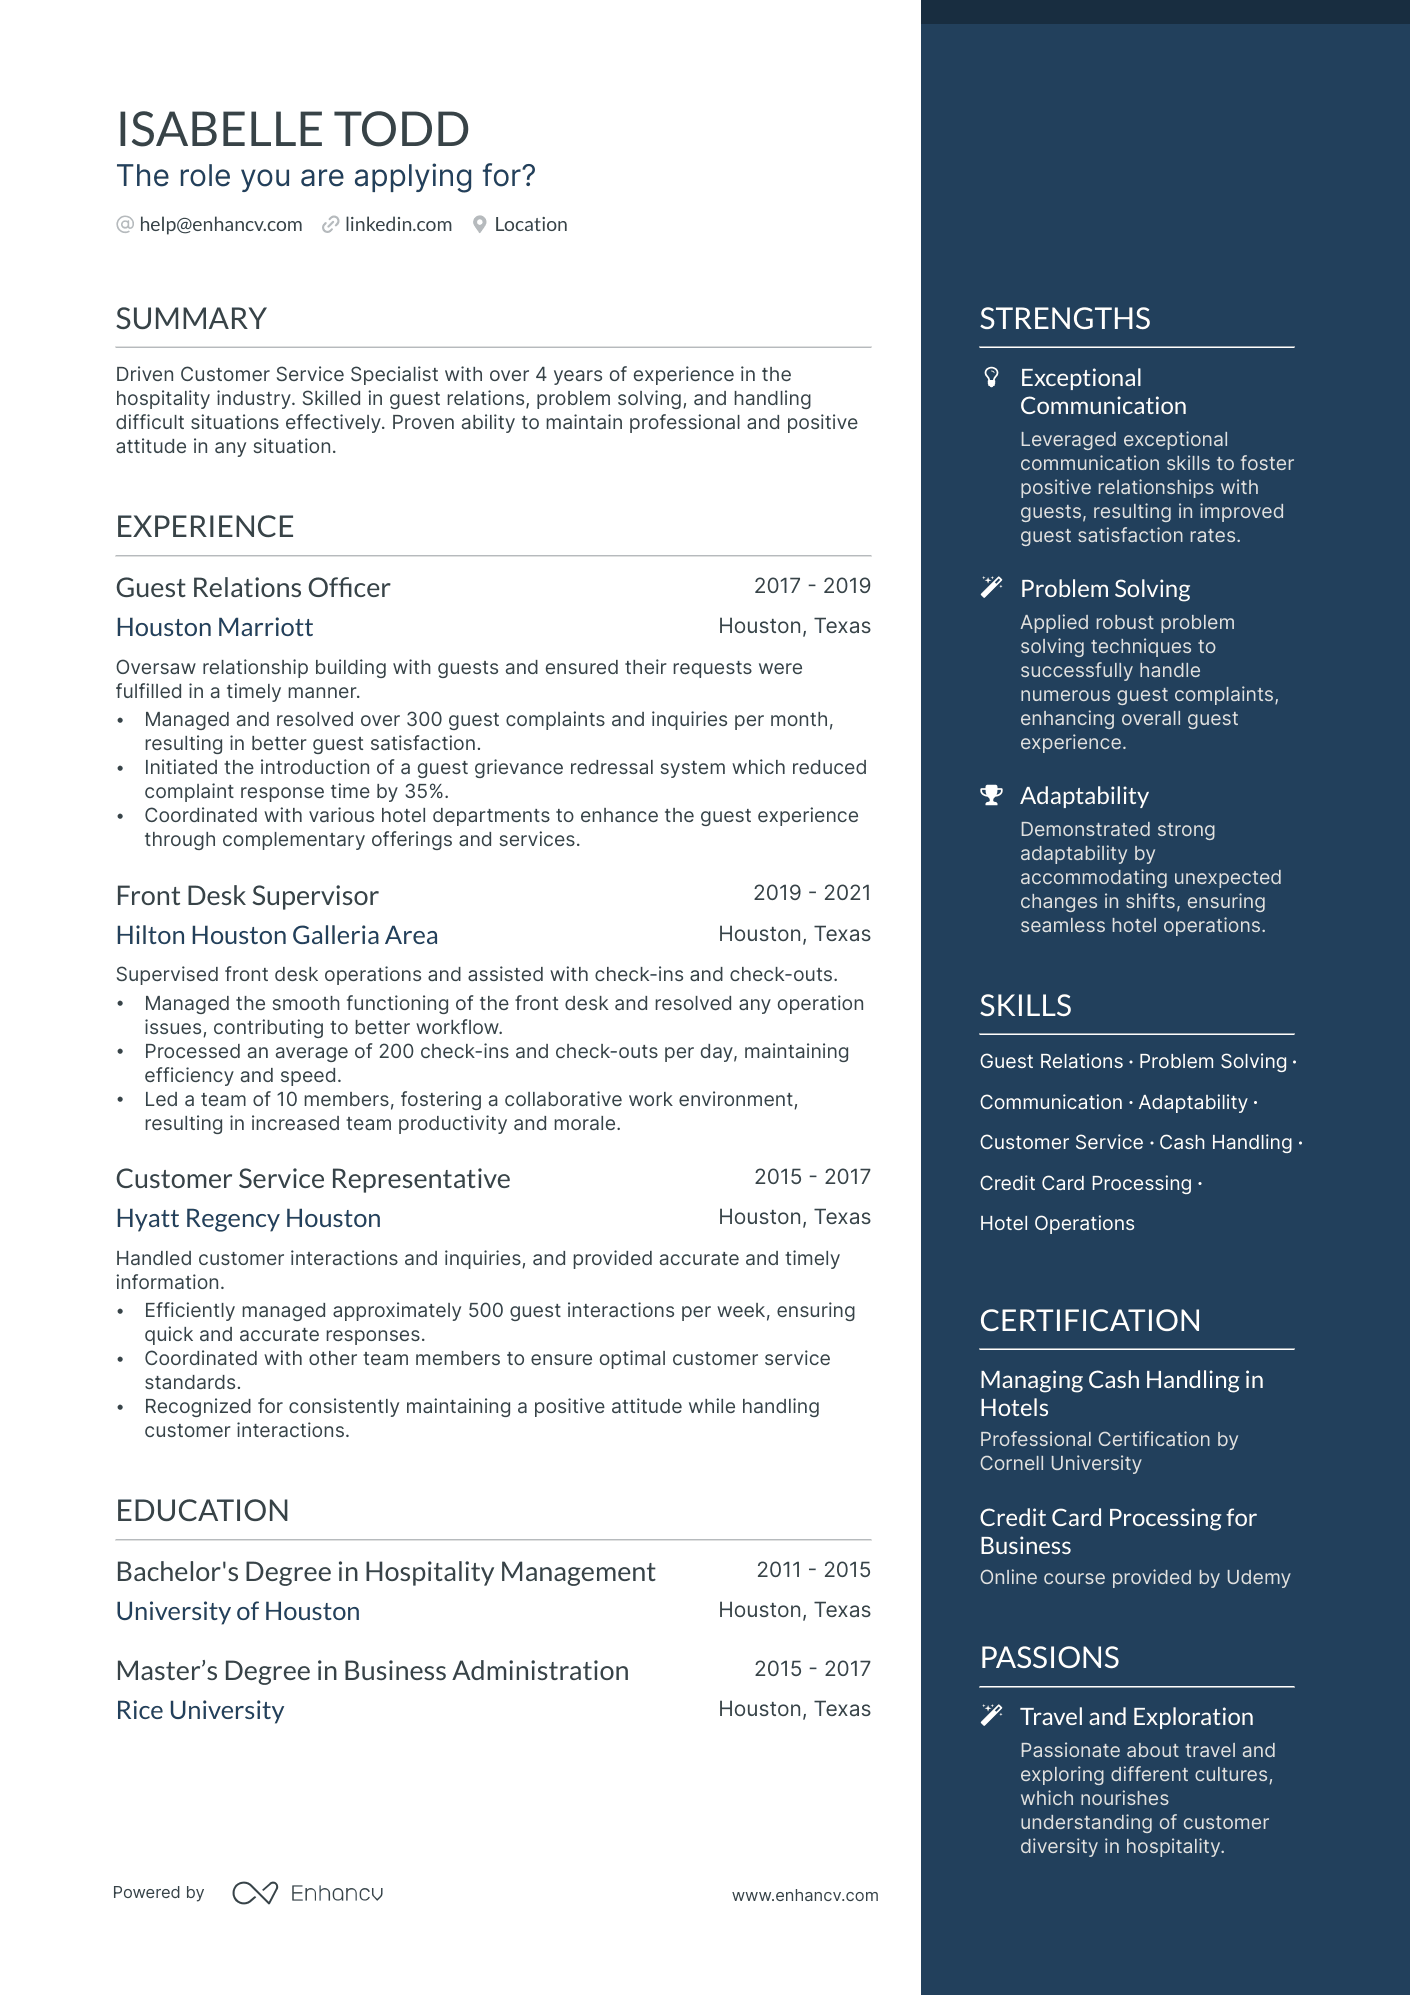 Front Desk Agent resume example